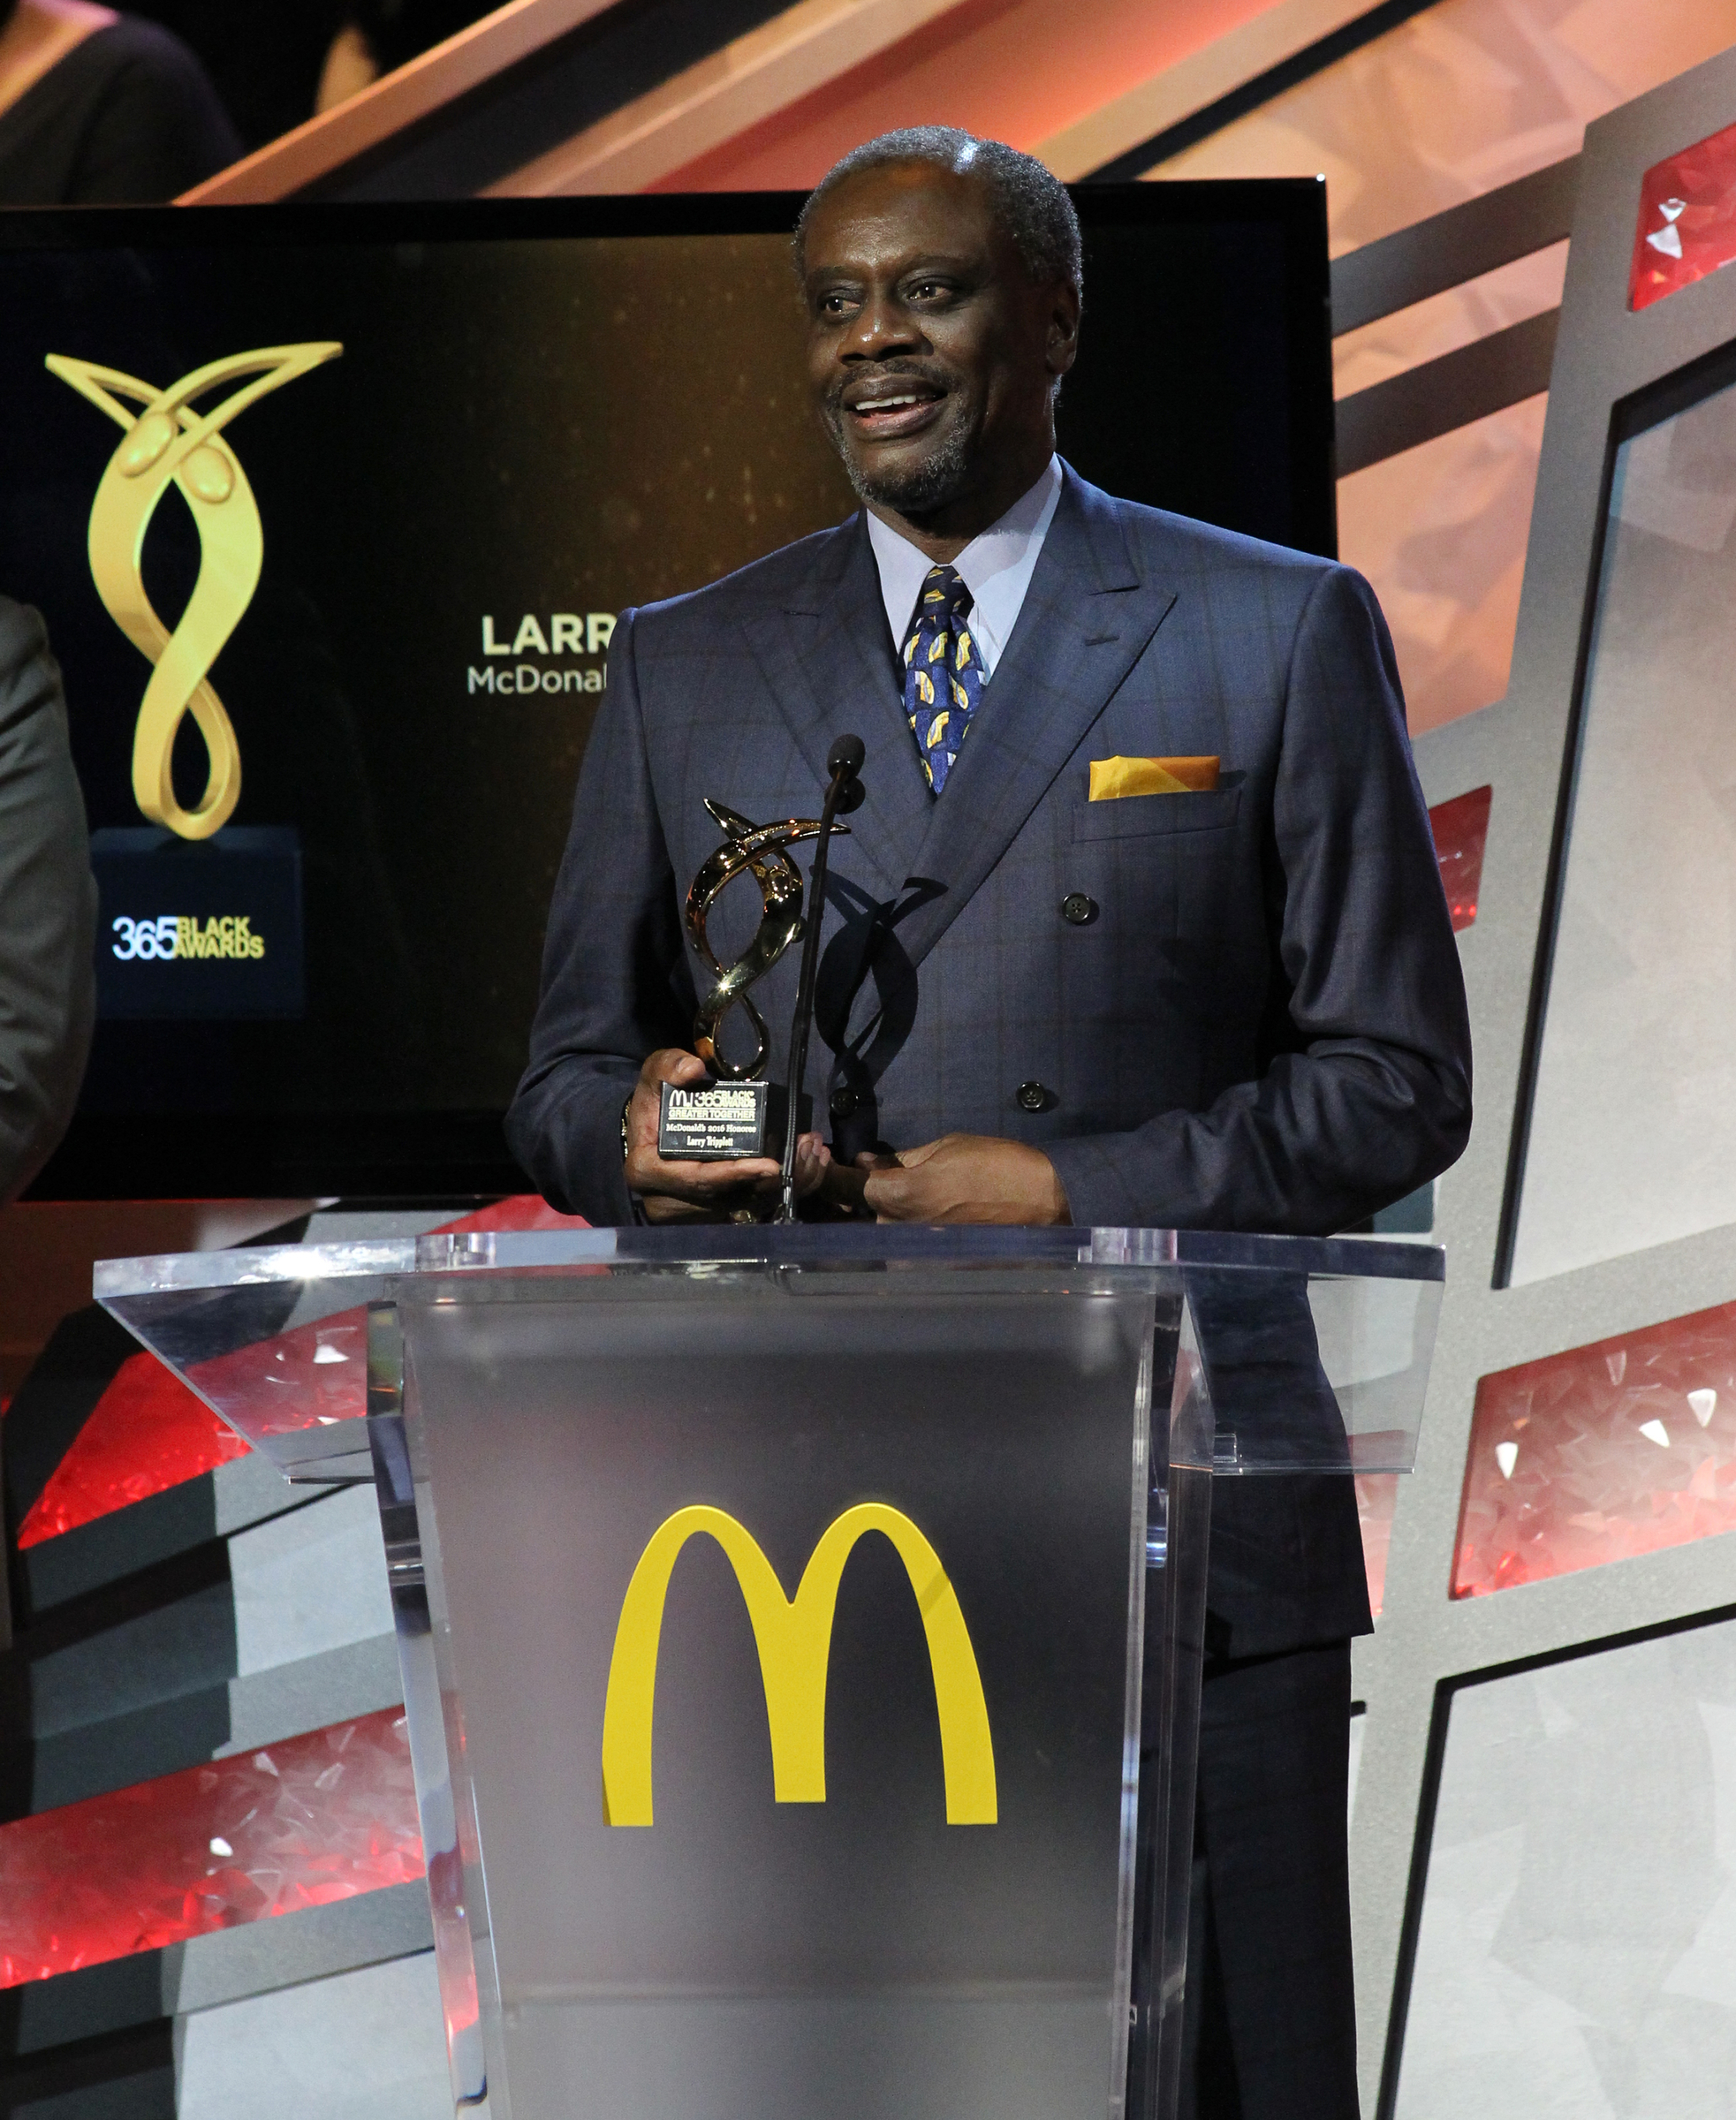 McDonalds owner/operator honoree Larry Tripplett attends the 13th Annual McDonald's 365 Black Awards at the Ernest Moral Convention Center in New Orleans, LA on Friday, July 1, 2016.